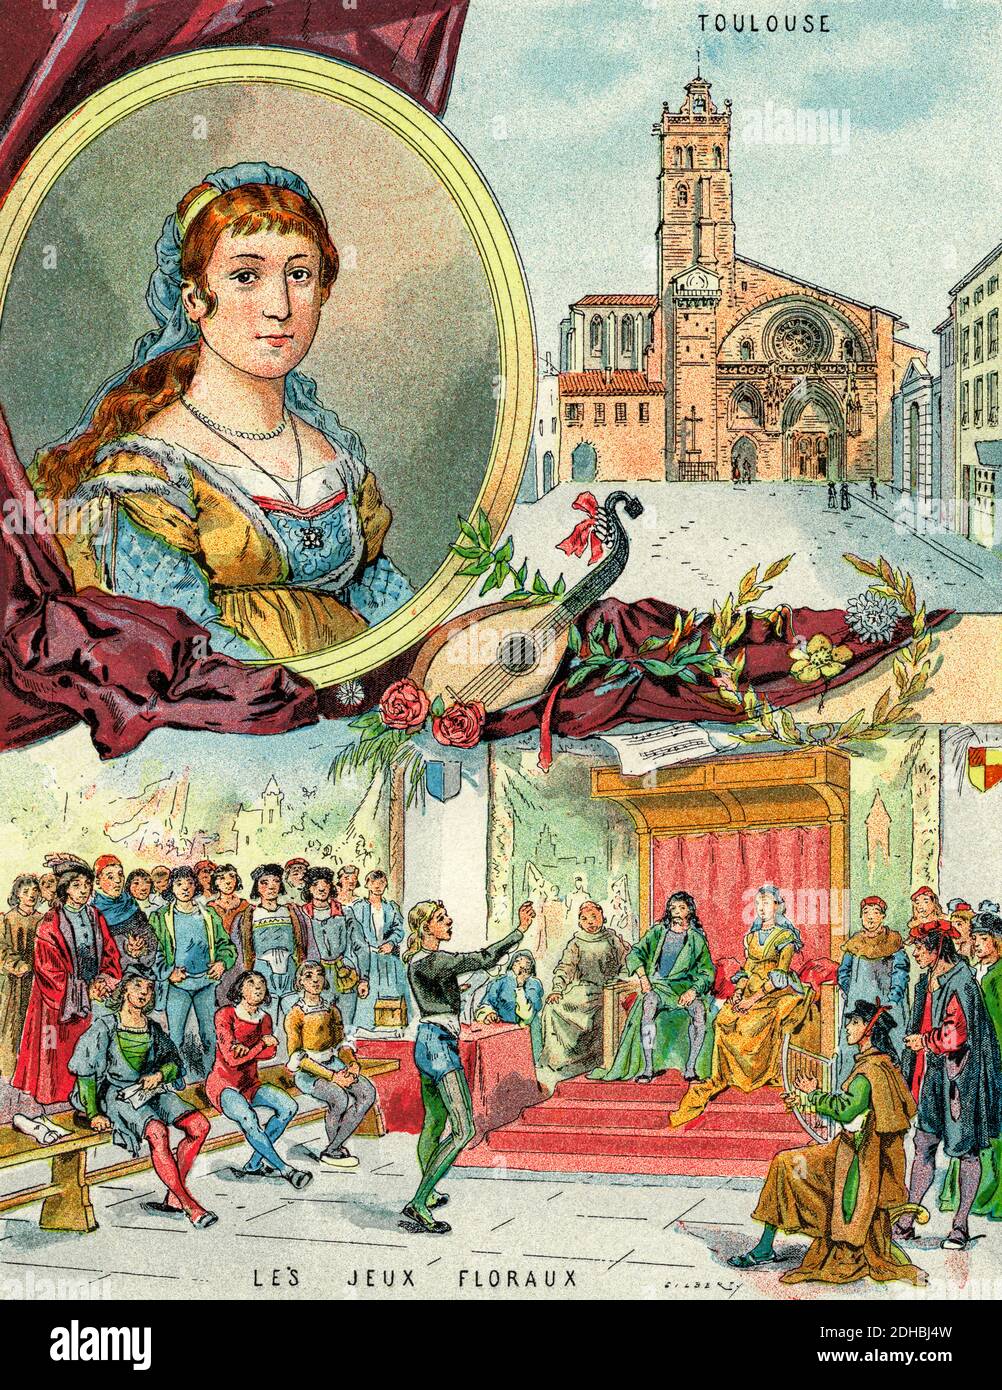 Old color lithography portrait of Clemence Isaure (1463-1513) Legendary medieval woman, founder of the Acadèmia dels Jòcs Florals or Academy of Floral Games. Member of the Yzalguier family from Toulouse. France. Les Français Illustres by Gustave Demoulin 1897 Stock Photo